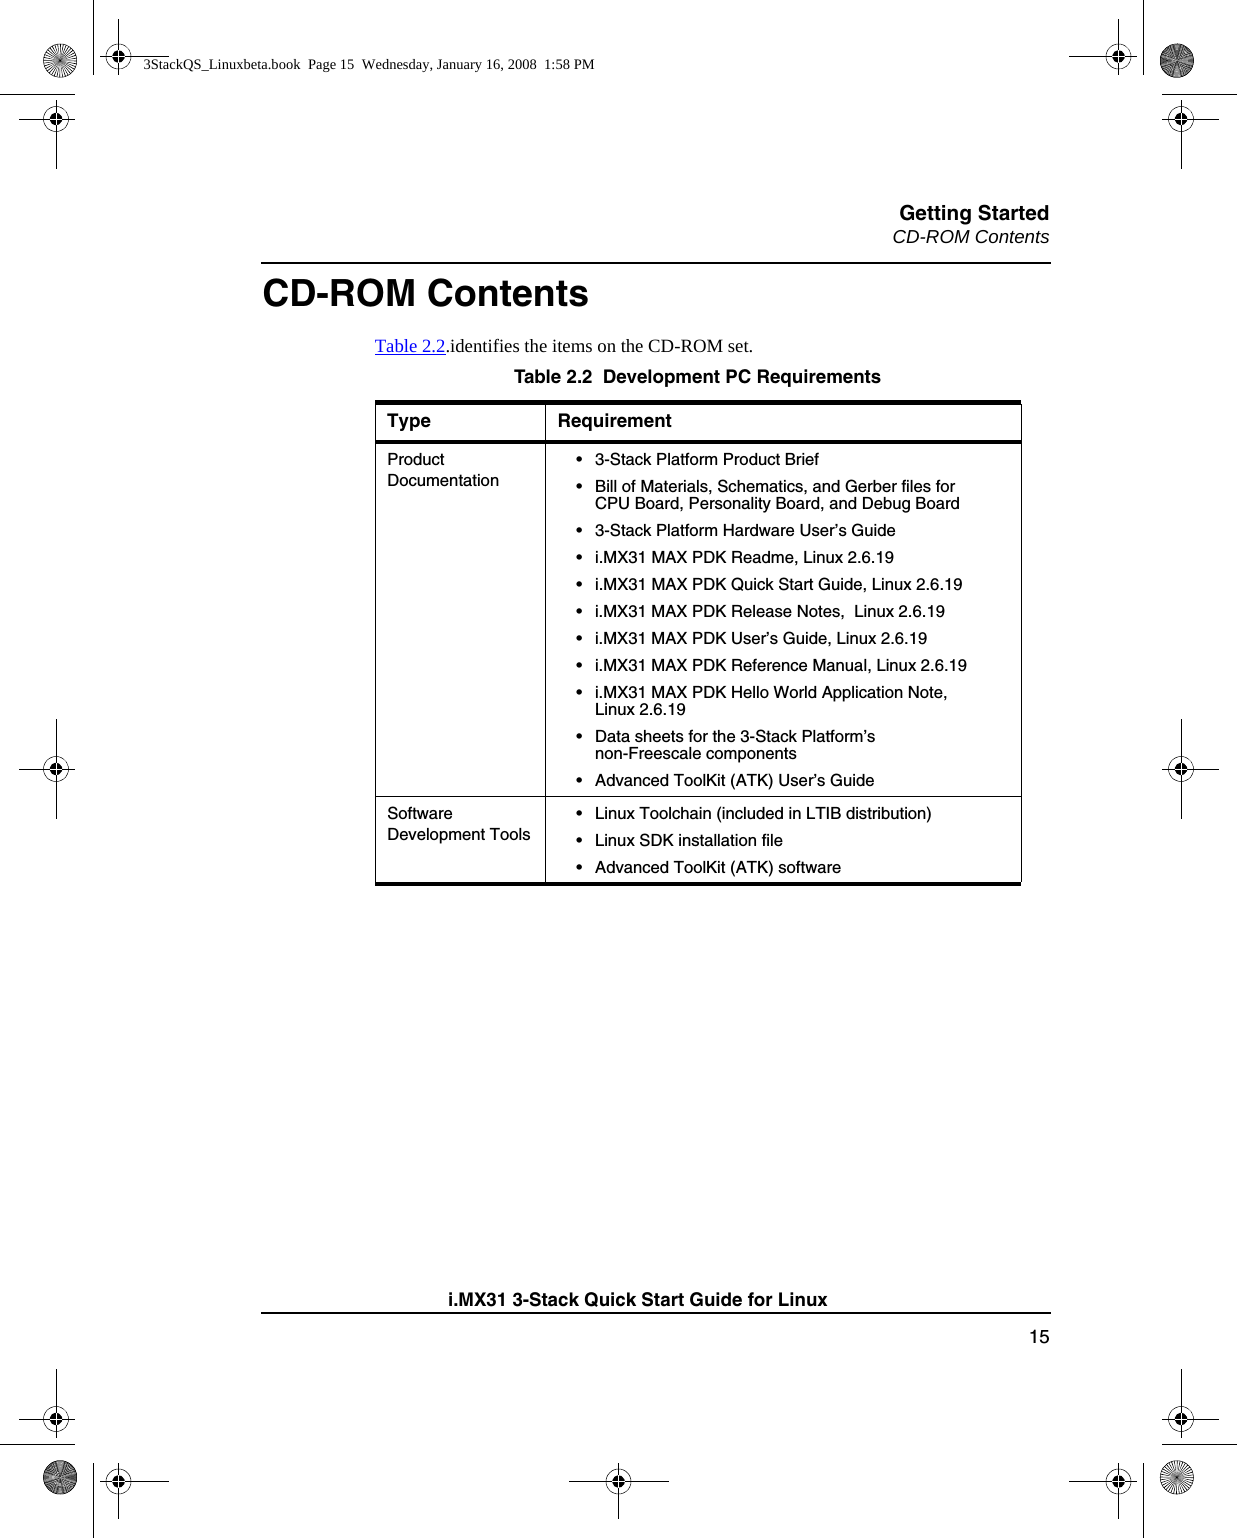 Getting StartedCD-ROM Contents15i.MX31 3-Stack Quick Start Guide for LinuxCD-ROM ContentsTable 2.2.identifies the items on the CD-ROM set. Table 2.2  Development PC RequirementsType RequirementProduct Documentation• 3-Stack Platform Product Brief• Bill of Materials, Schematics, and Gerber files for CPU Board, Personality Board, and Debug Board• 3-Stack Platform Hardware User’s Guide• i.MX31 MAX PDK Readme, Linux 2.6.19• i.MX31 MAX PDK Quick Start Guide, Linux 2.6.19• i.MX31 MAX PDK Release Notes,  Linux 2.6.19• i.MX31 MAX PDK User’s Guide, Linux 2.6.19• i.MX31 MAX PDK Reference Manual, Linux 2.6.19• i.MX31 MAX PDK Hello World Application Note, Linux 2.6.19• Data sheets for the 3-Stack Platform’s non-Freescale components• Advanced ToolKit (ATK) User’s GuideSoftware Development Tools• Linux Toolchain (included in LTIB distribution)• Linux SDK installation file• Advanced ToolKit (ATK) software3StackQS_Linuxbeta.book  Page 15  Wednesday, January 16, 2008  1:58 PM